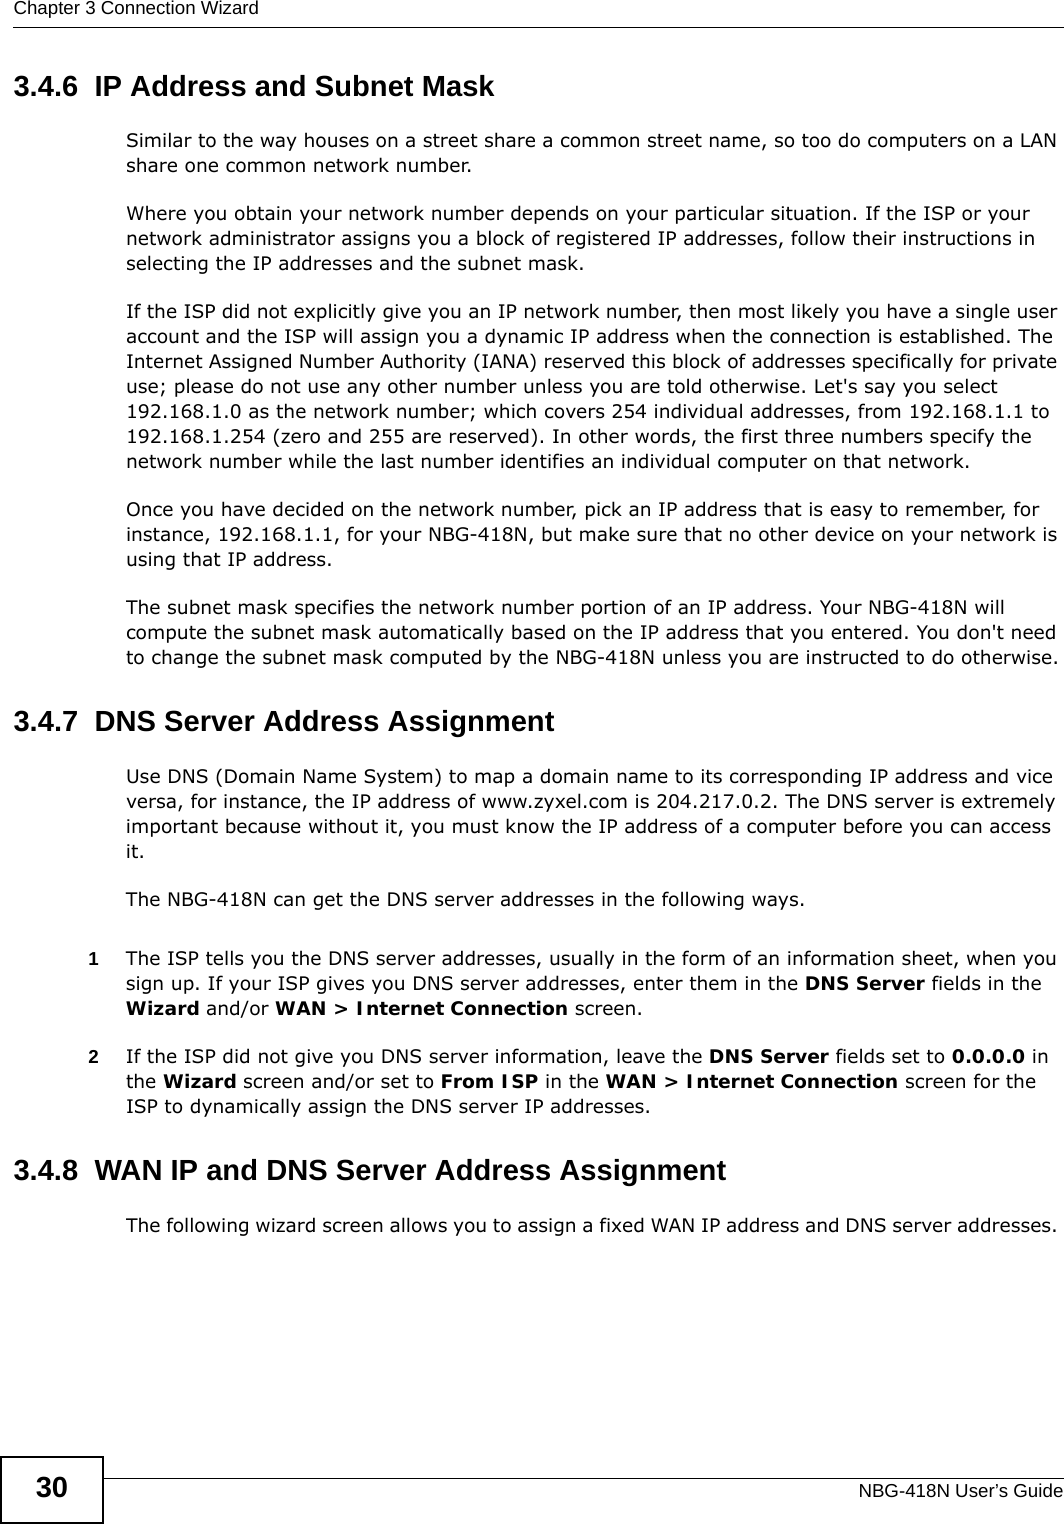 Chapter 3 Connection WizardNBG-418N User’s Guide303.4.6  IP Address and Subnet MaskSimilar to the way houses on a street share a common street name, so too do computers on a LAN share one common network number.Where you obtain your network number depends on your particular situation. If the ISP or your network administrator assigns you a block of registered IP addresses, follow their instructions in selecting the IP addresses and the subnet mask.If the ISP did not explicitly give you an IP network number, then most likely you have a single user account and the ISP will assign you a dynamic IP address when the connection is established. The Internet Assigned Number Authority (IANA) reserved this block of addresses specifically for private use; please do not use any other number unless you are told otherwise. Let&apos;s say you select 192.168.1.0 as the network number; which covers 254 individual addresses, from 192.168.1.1 to 192.168.1.254 (zero and 255 are reserved). In other words, the first three numbers specify the network number while the last number identifies an individual computer on that network.Once you have decided on the network number, pick an IP address that is easy to remember, for instance, 192.168.1.1, for your NBG-418N, but make sure that no other device on your network is using that IP address.The subnet mask specifies the network number portion of an IP address. Your NBG-418N will compute the subnet mask automatically based on the IP address that you entered. You don&apos;t need to change the subnet mask computed by the NBG-418N unless you are instructed to do otherwise.3.4.7  DNS Server Address AssignmentUse DNS (Domain Name System) to map a domain name to its corresponding IP address and vice versa, for instance, the IP address of www.zyxel.com is 204.217.0.2. The DNS server is extremely important because without it, you must know the IP address of a computer before you can access it. The NBG-418N can get the DNS server addresses in the following ways.1The ISP tells you the DNS server addresses, usually in the form of an information sheet, when you sign up. If your ISP gives you DNS server addresses, enter them in the DNS Server fields in the Wizard and/or WAN &gt; Internet Connection screen.2If the ISP did not give you DNS server information, leave the DNS Server fields set to 0.0.0.0 in the Wizard screen and/or set to From ISP in the WAN &gt; Internet Connection screen for the ISP to dynamically assign the DNS server IP addresses.3.4.8  WAN IP and DNS Server Address AssignmentThe following wizard screen allows you to assign a fixed WAN IP address and DNS server addresses. 